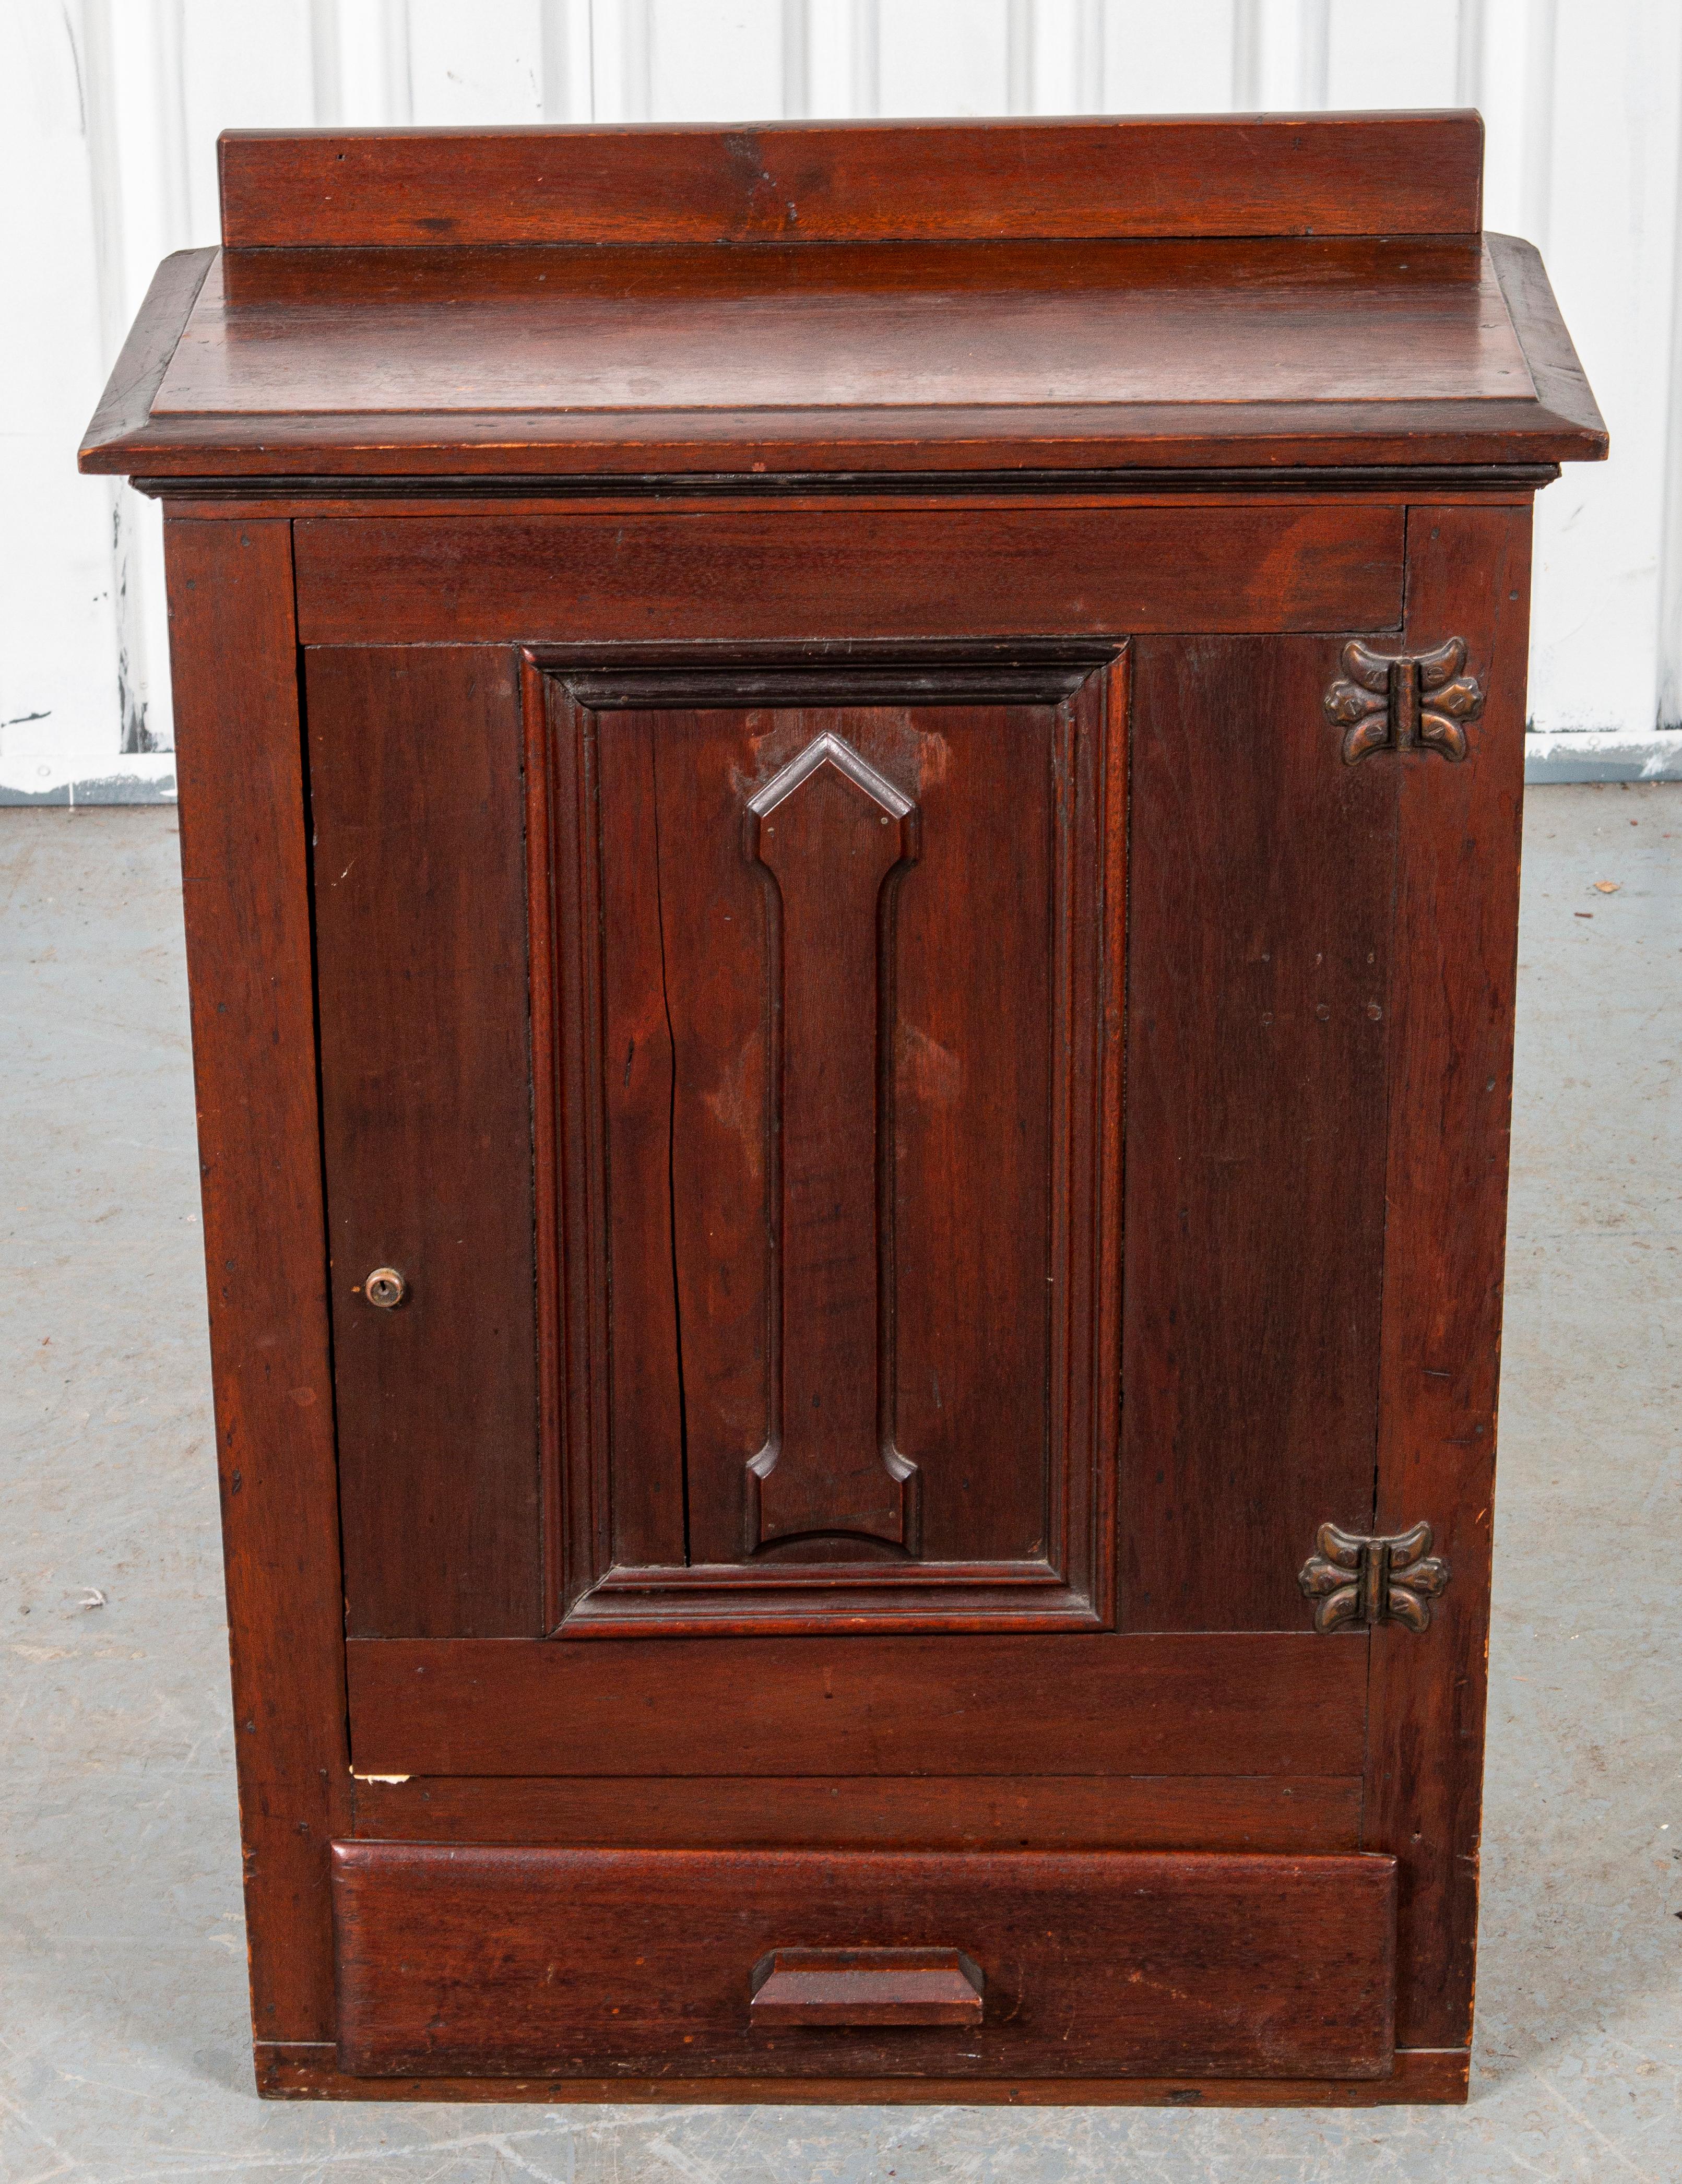 Hanging cupboard in carved oak, likely early 20th century.